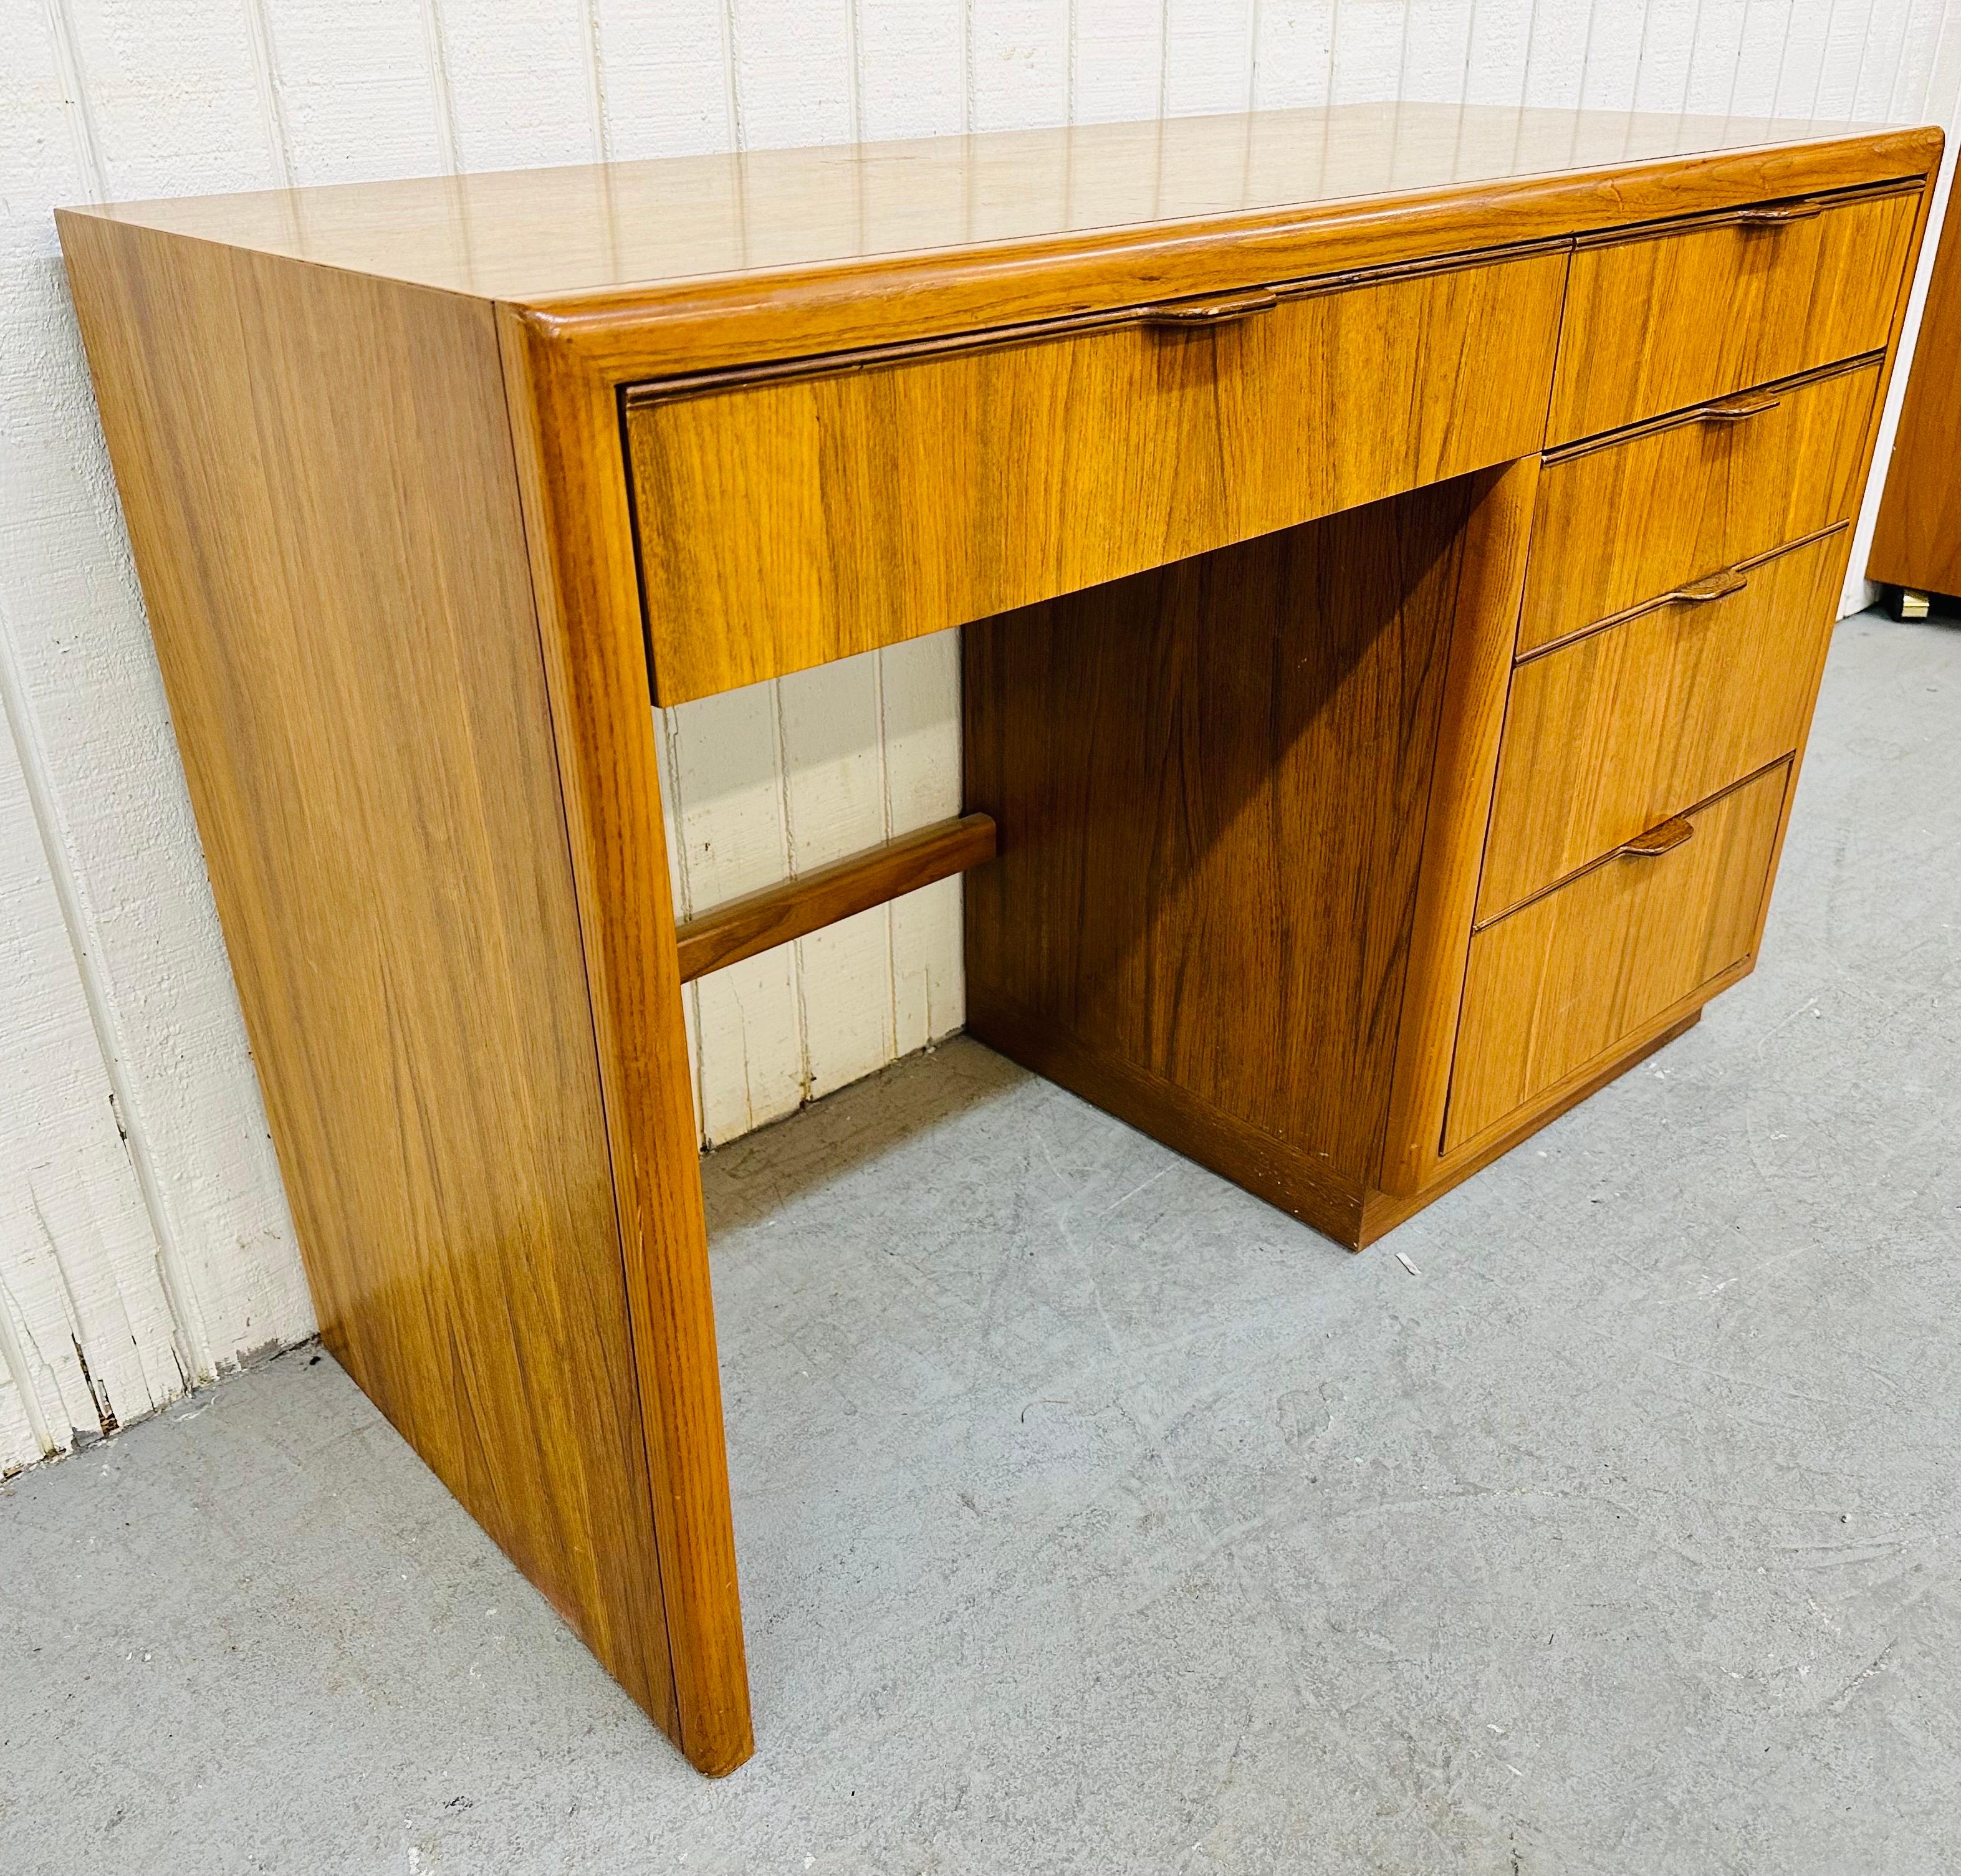 This listing is for a vintage Drexel Heritage Modern Oak Writing Desk. Featuring a straight line modern design, four drawers four storage, rosewood drawer trim and pulls. This is an exceptional combination of quality and design by Drexel.